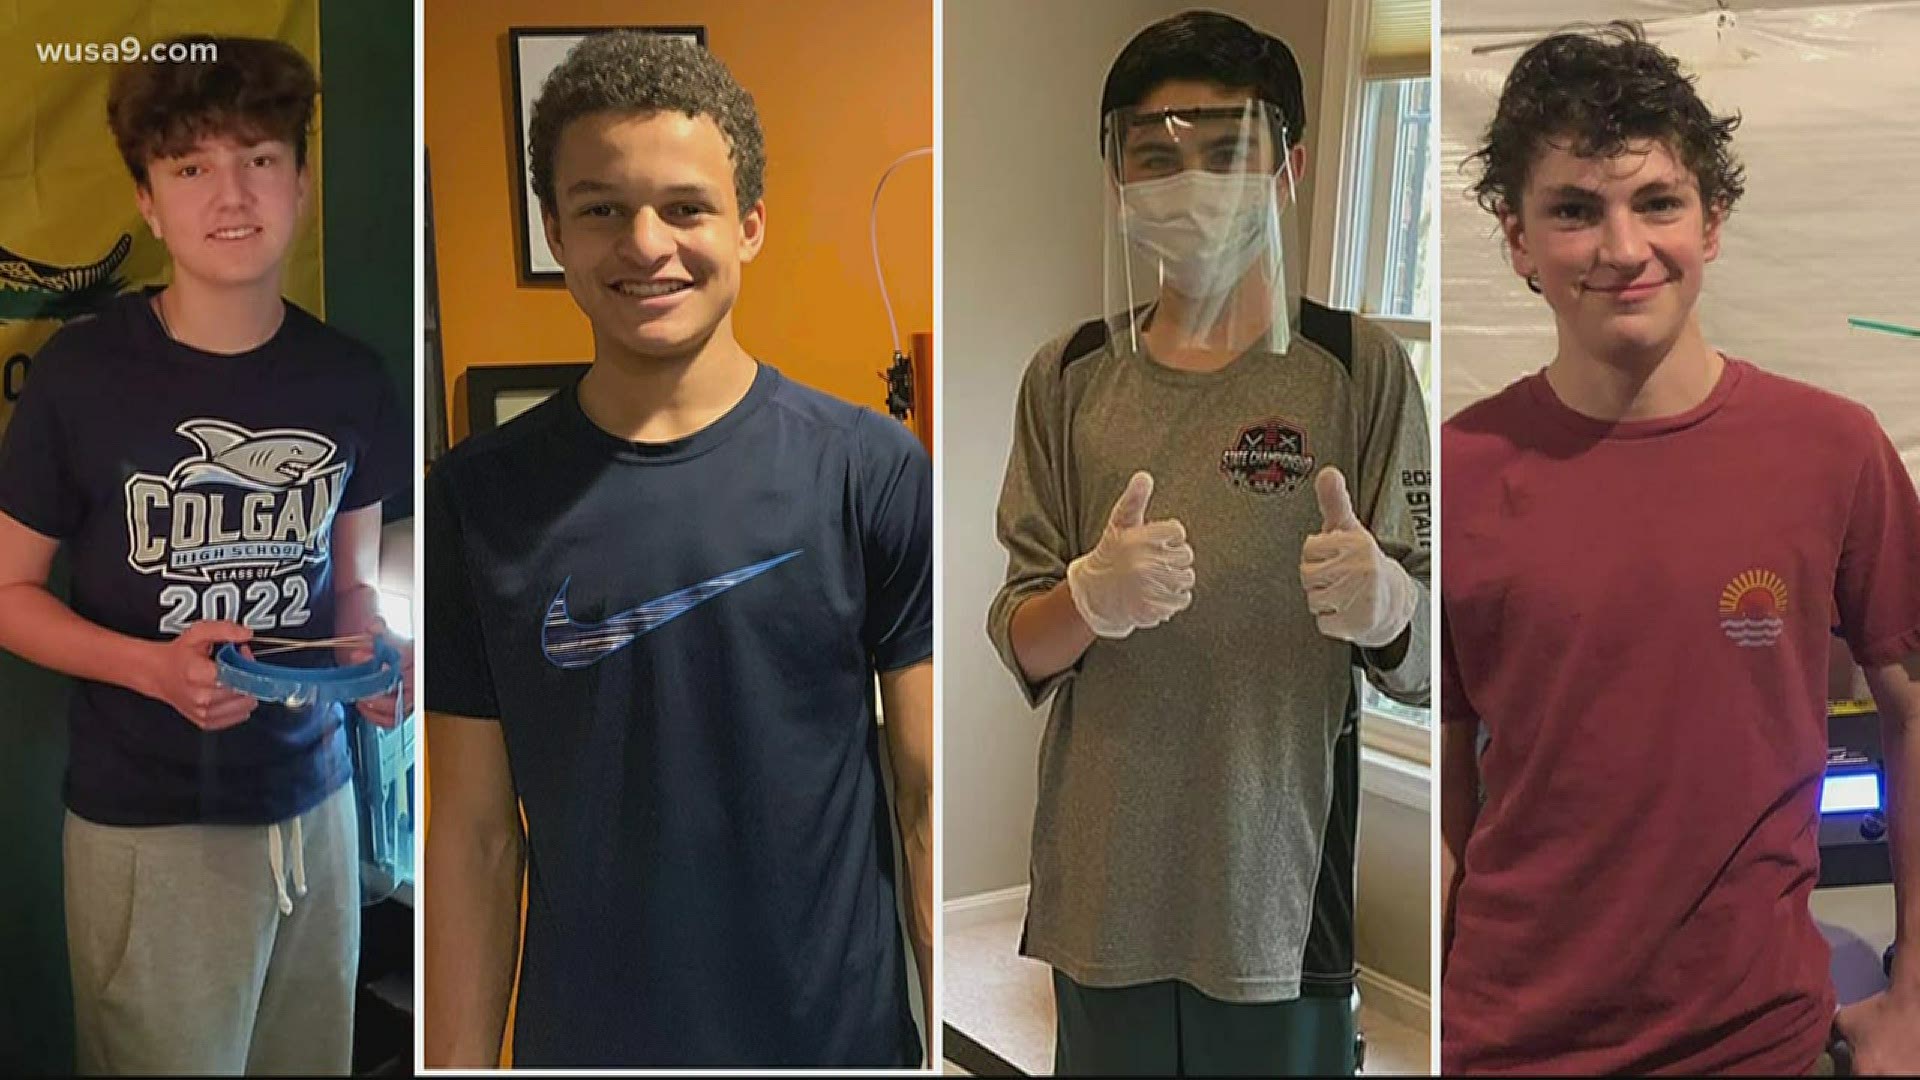 Running low on COVID-19 protective gear, an ophthalmologist turned to high school students for help. They're now printing a dozen face shields daily.